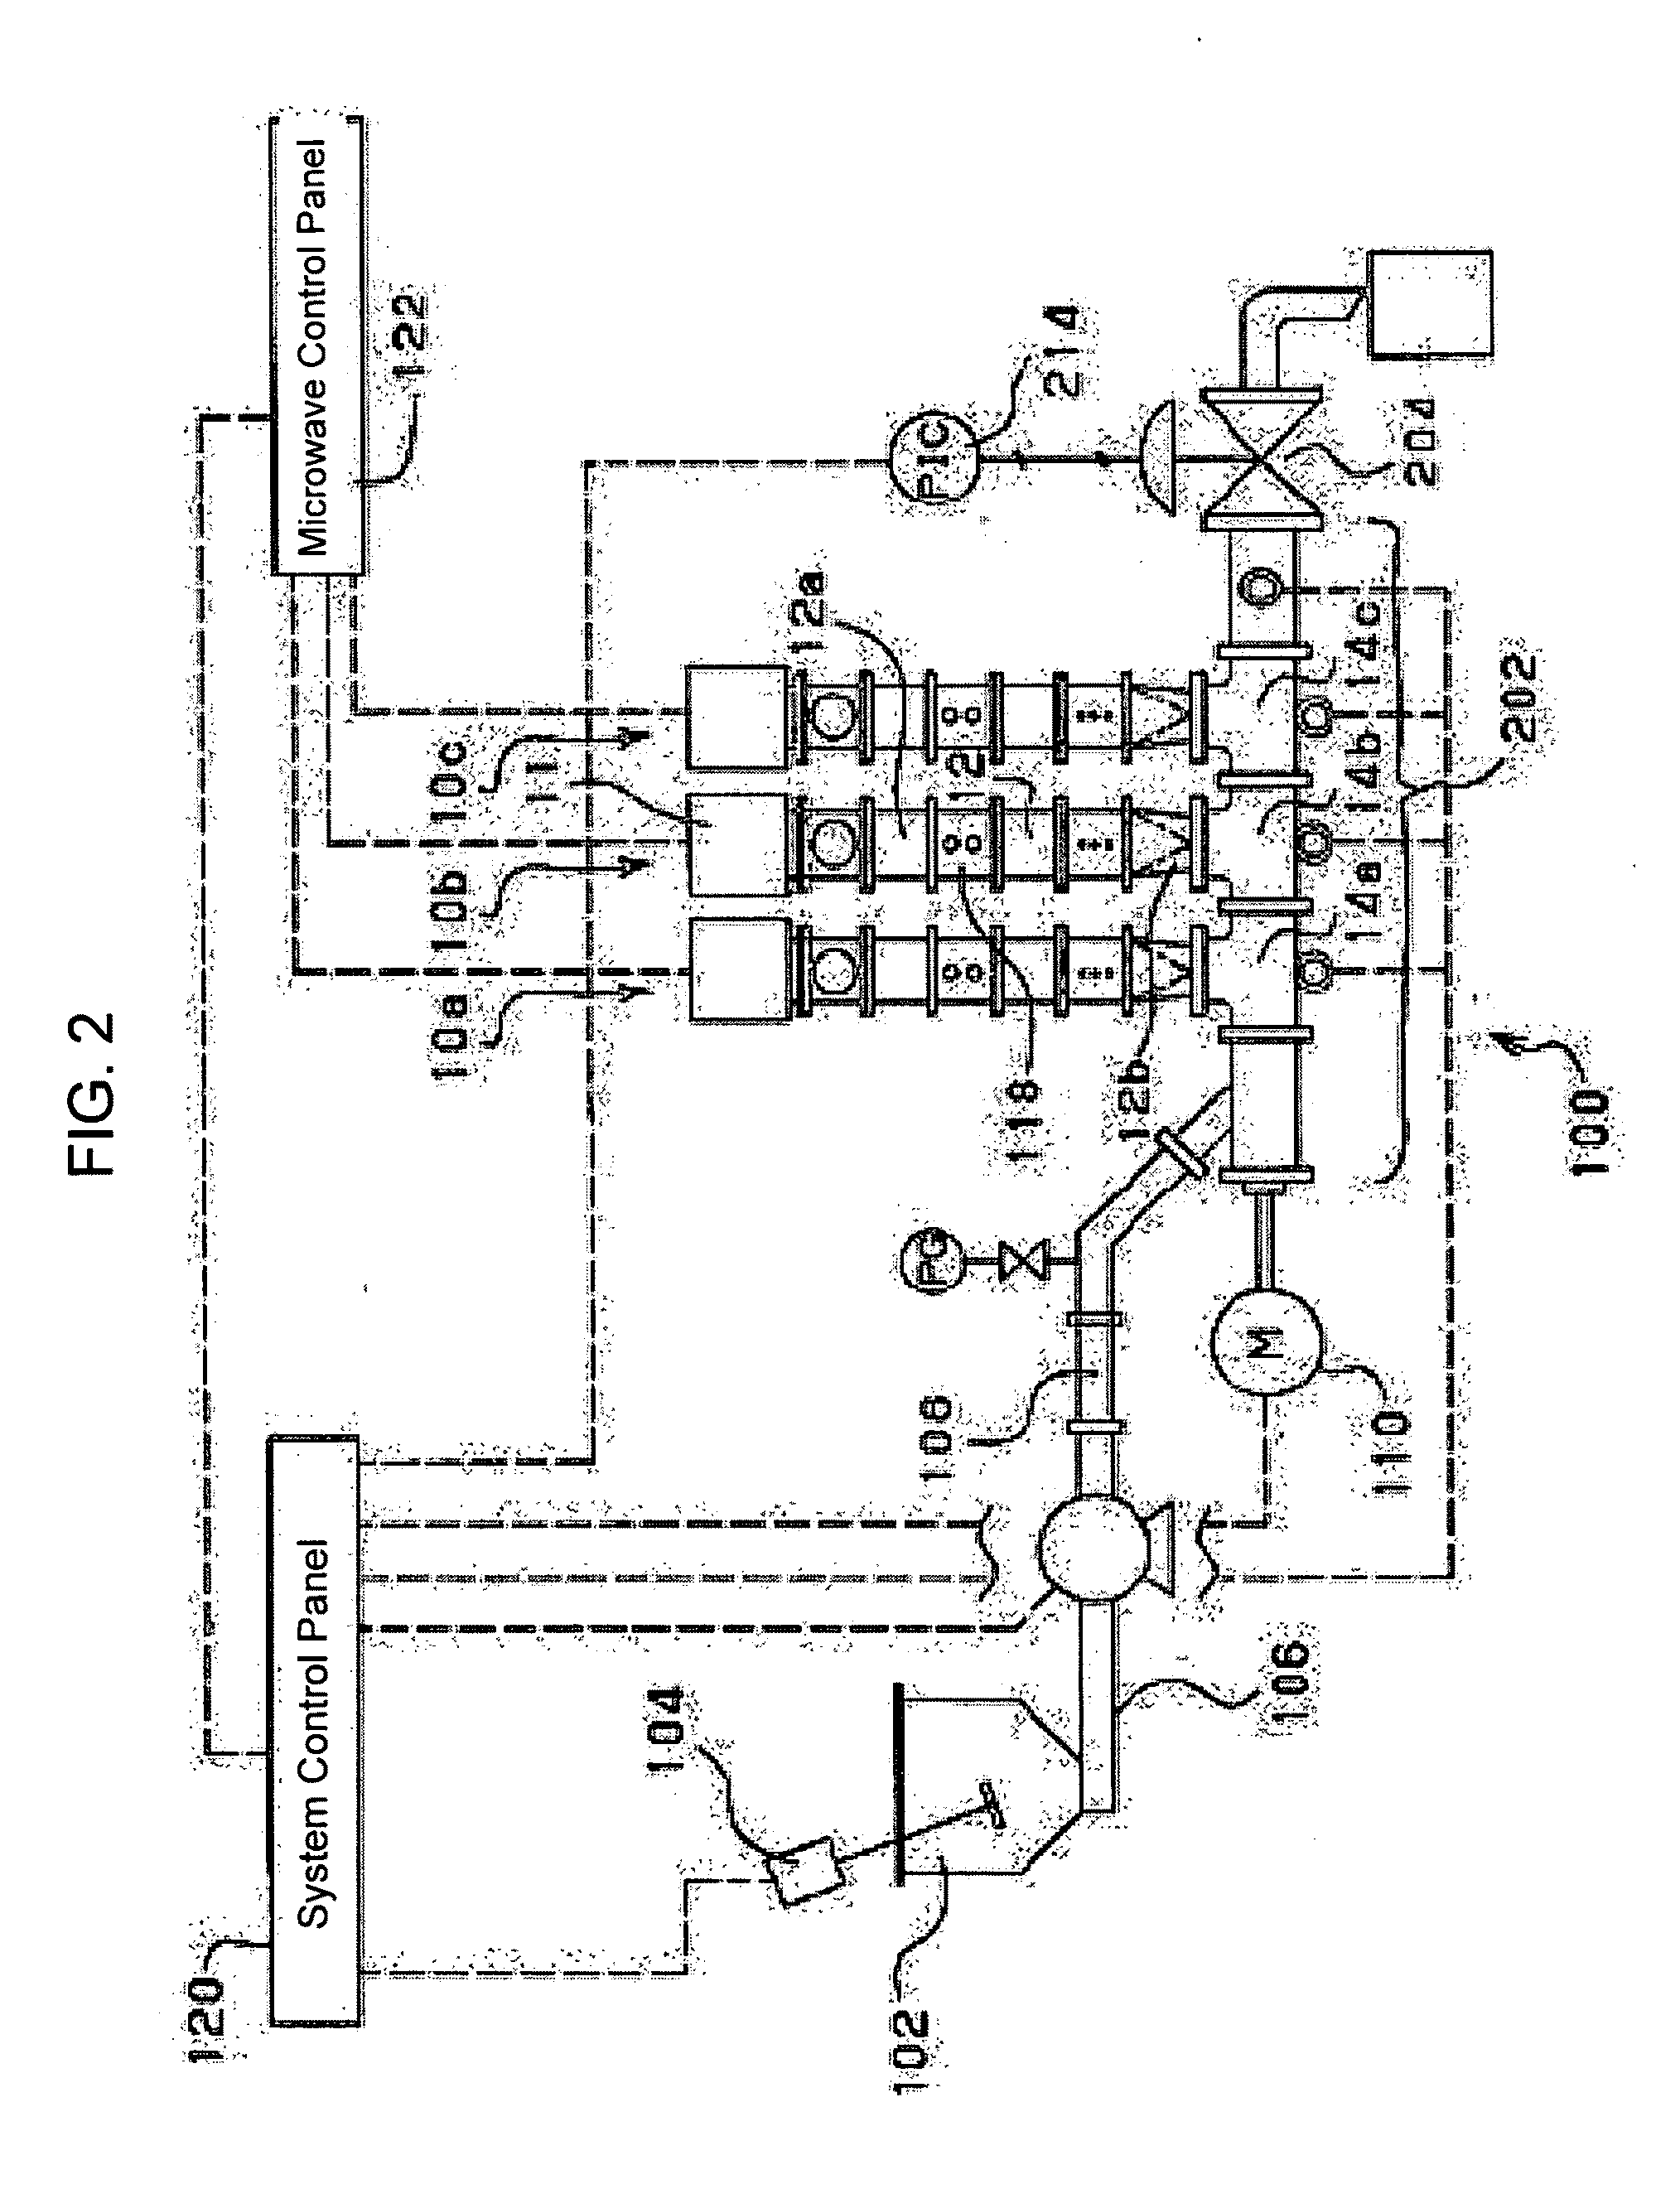 Microwave radiating device, connecting type microwave radiating device, and methods of producing sugar ingredient from plant materials